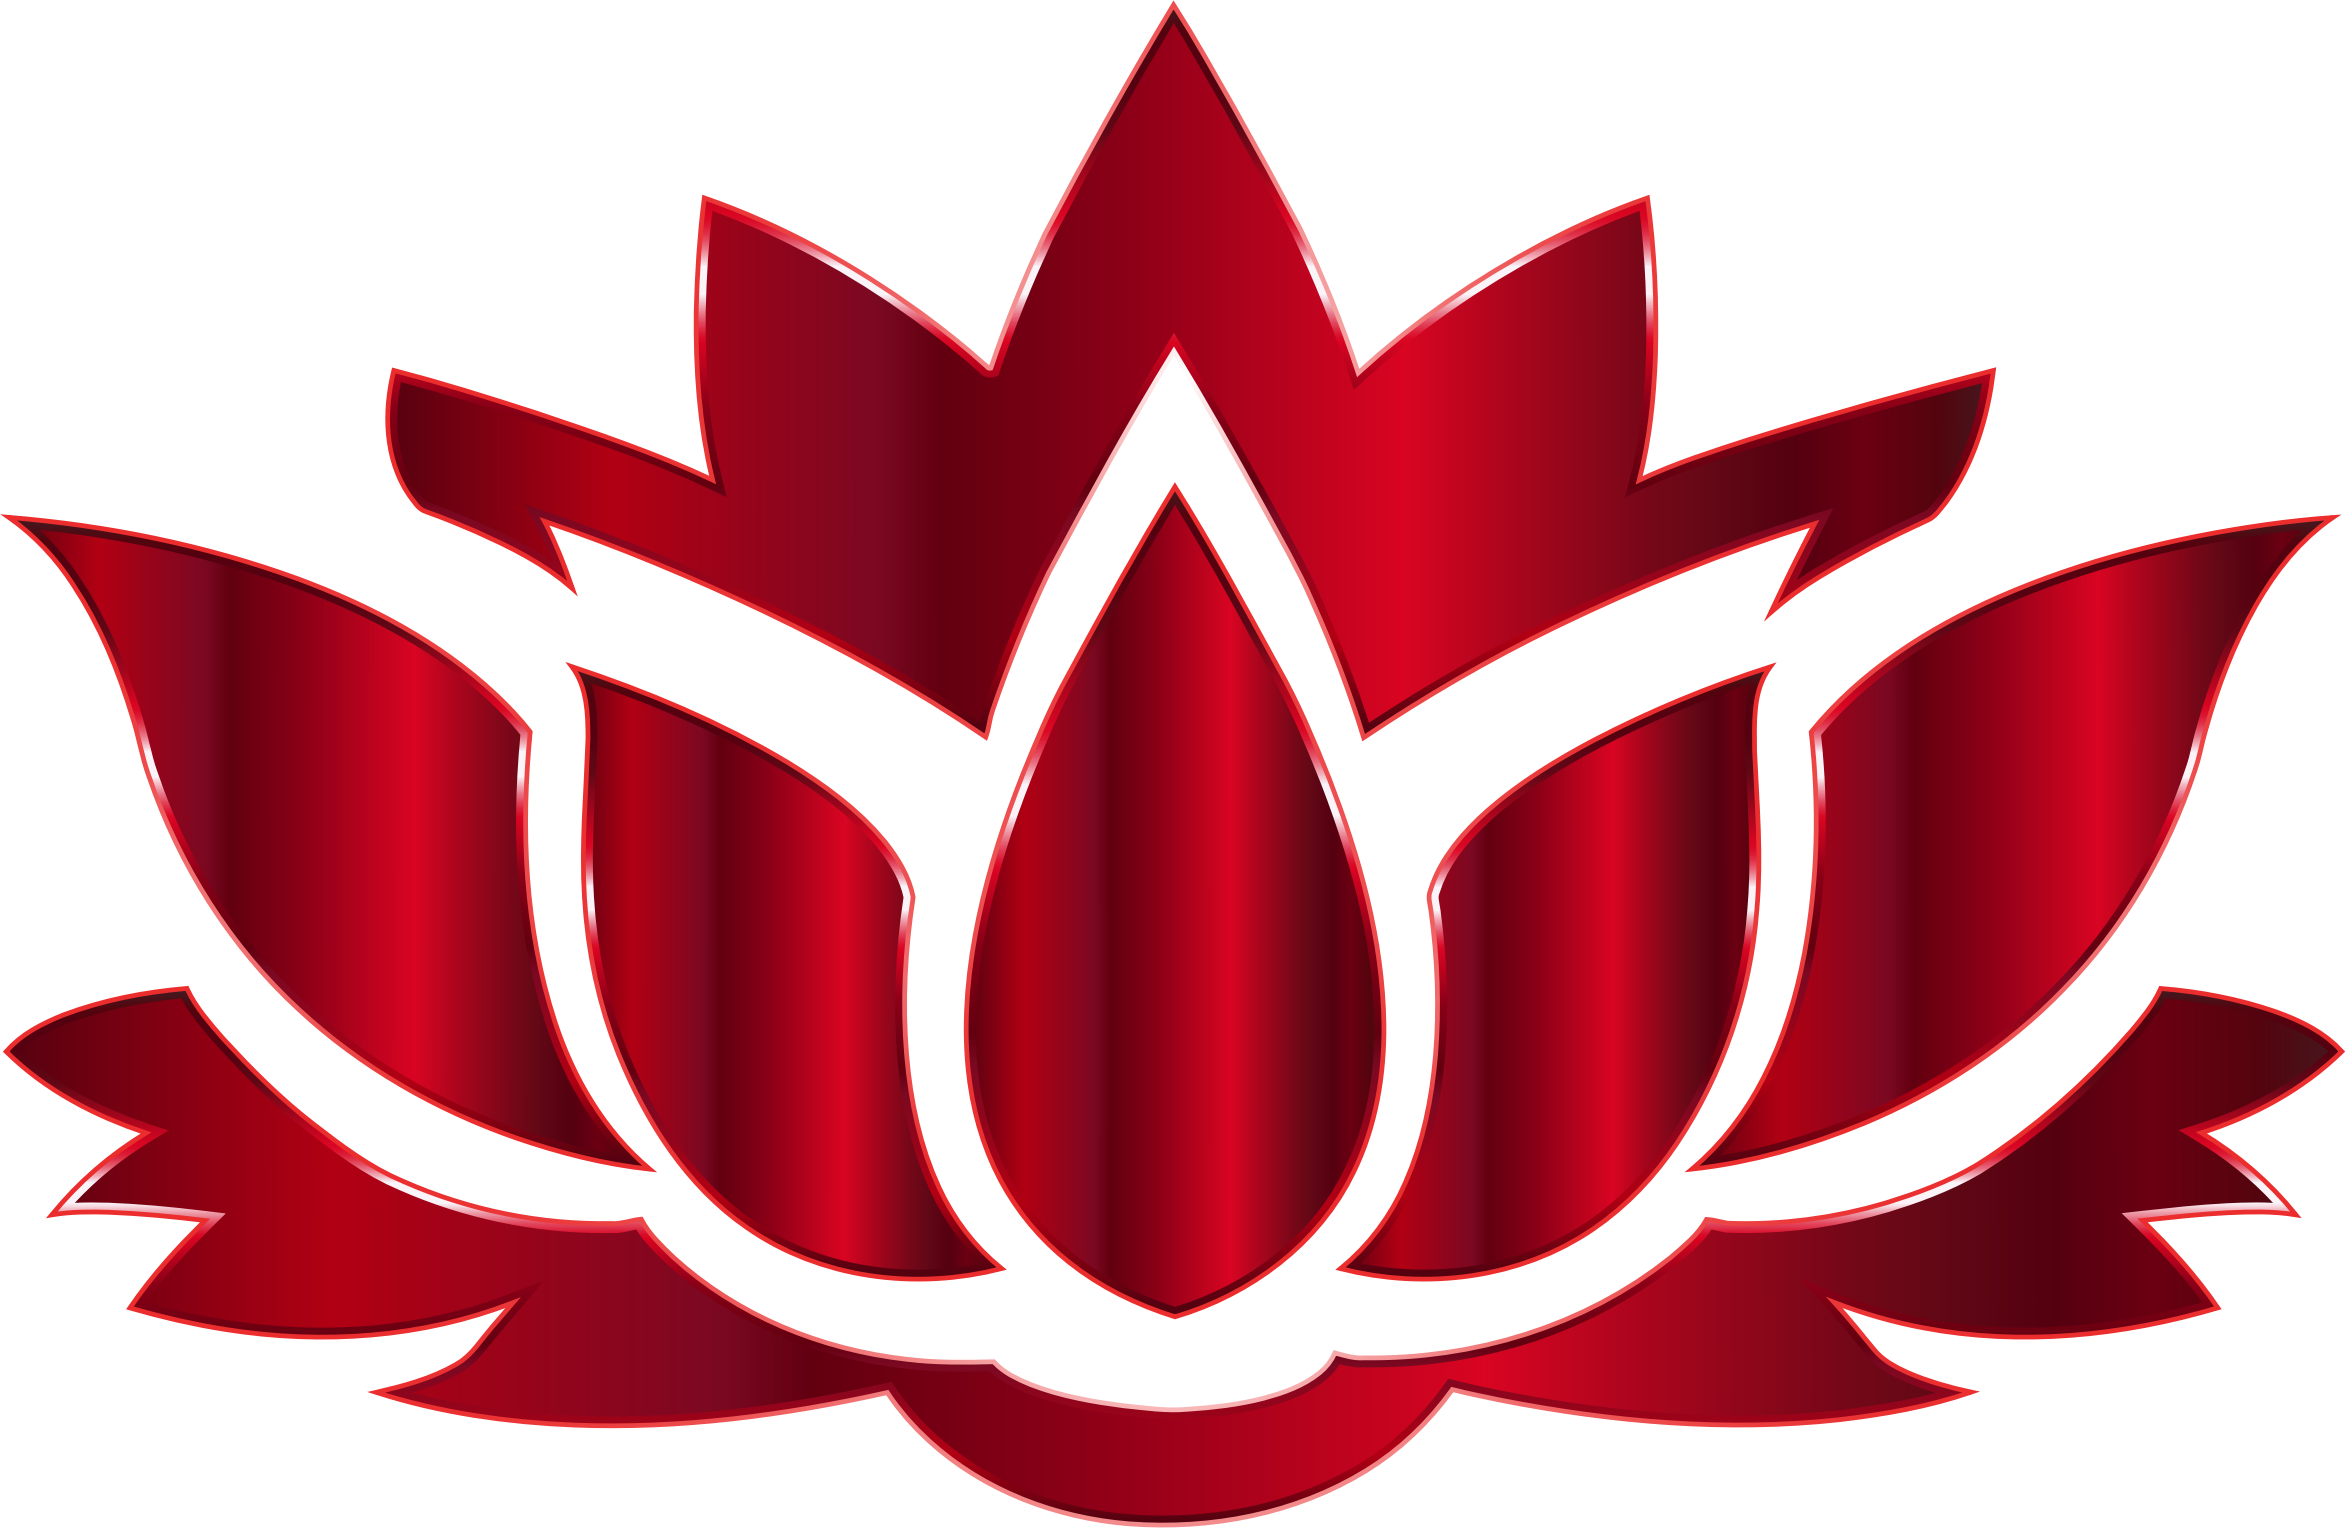 See Here Lotus Flower Outline Clip Art Free Images - Lotus Flower Logo Png (2346x1528)